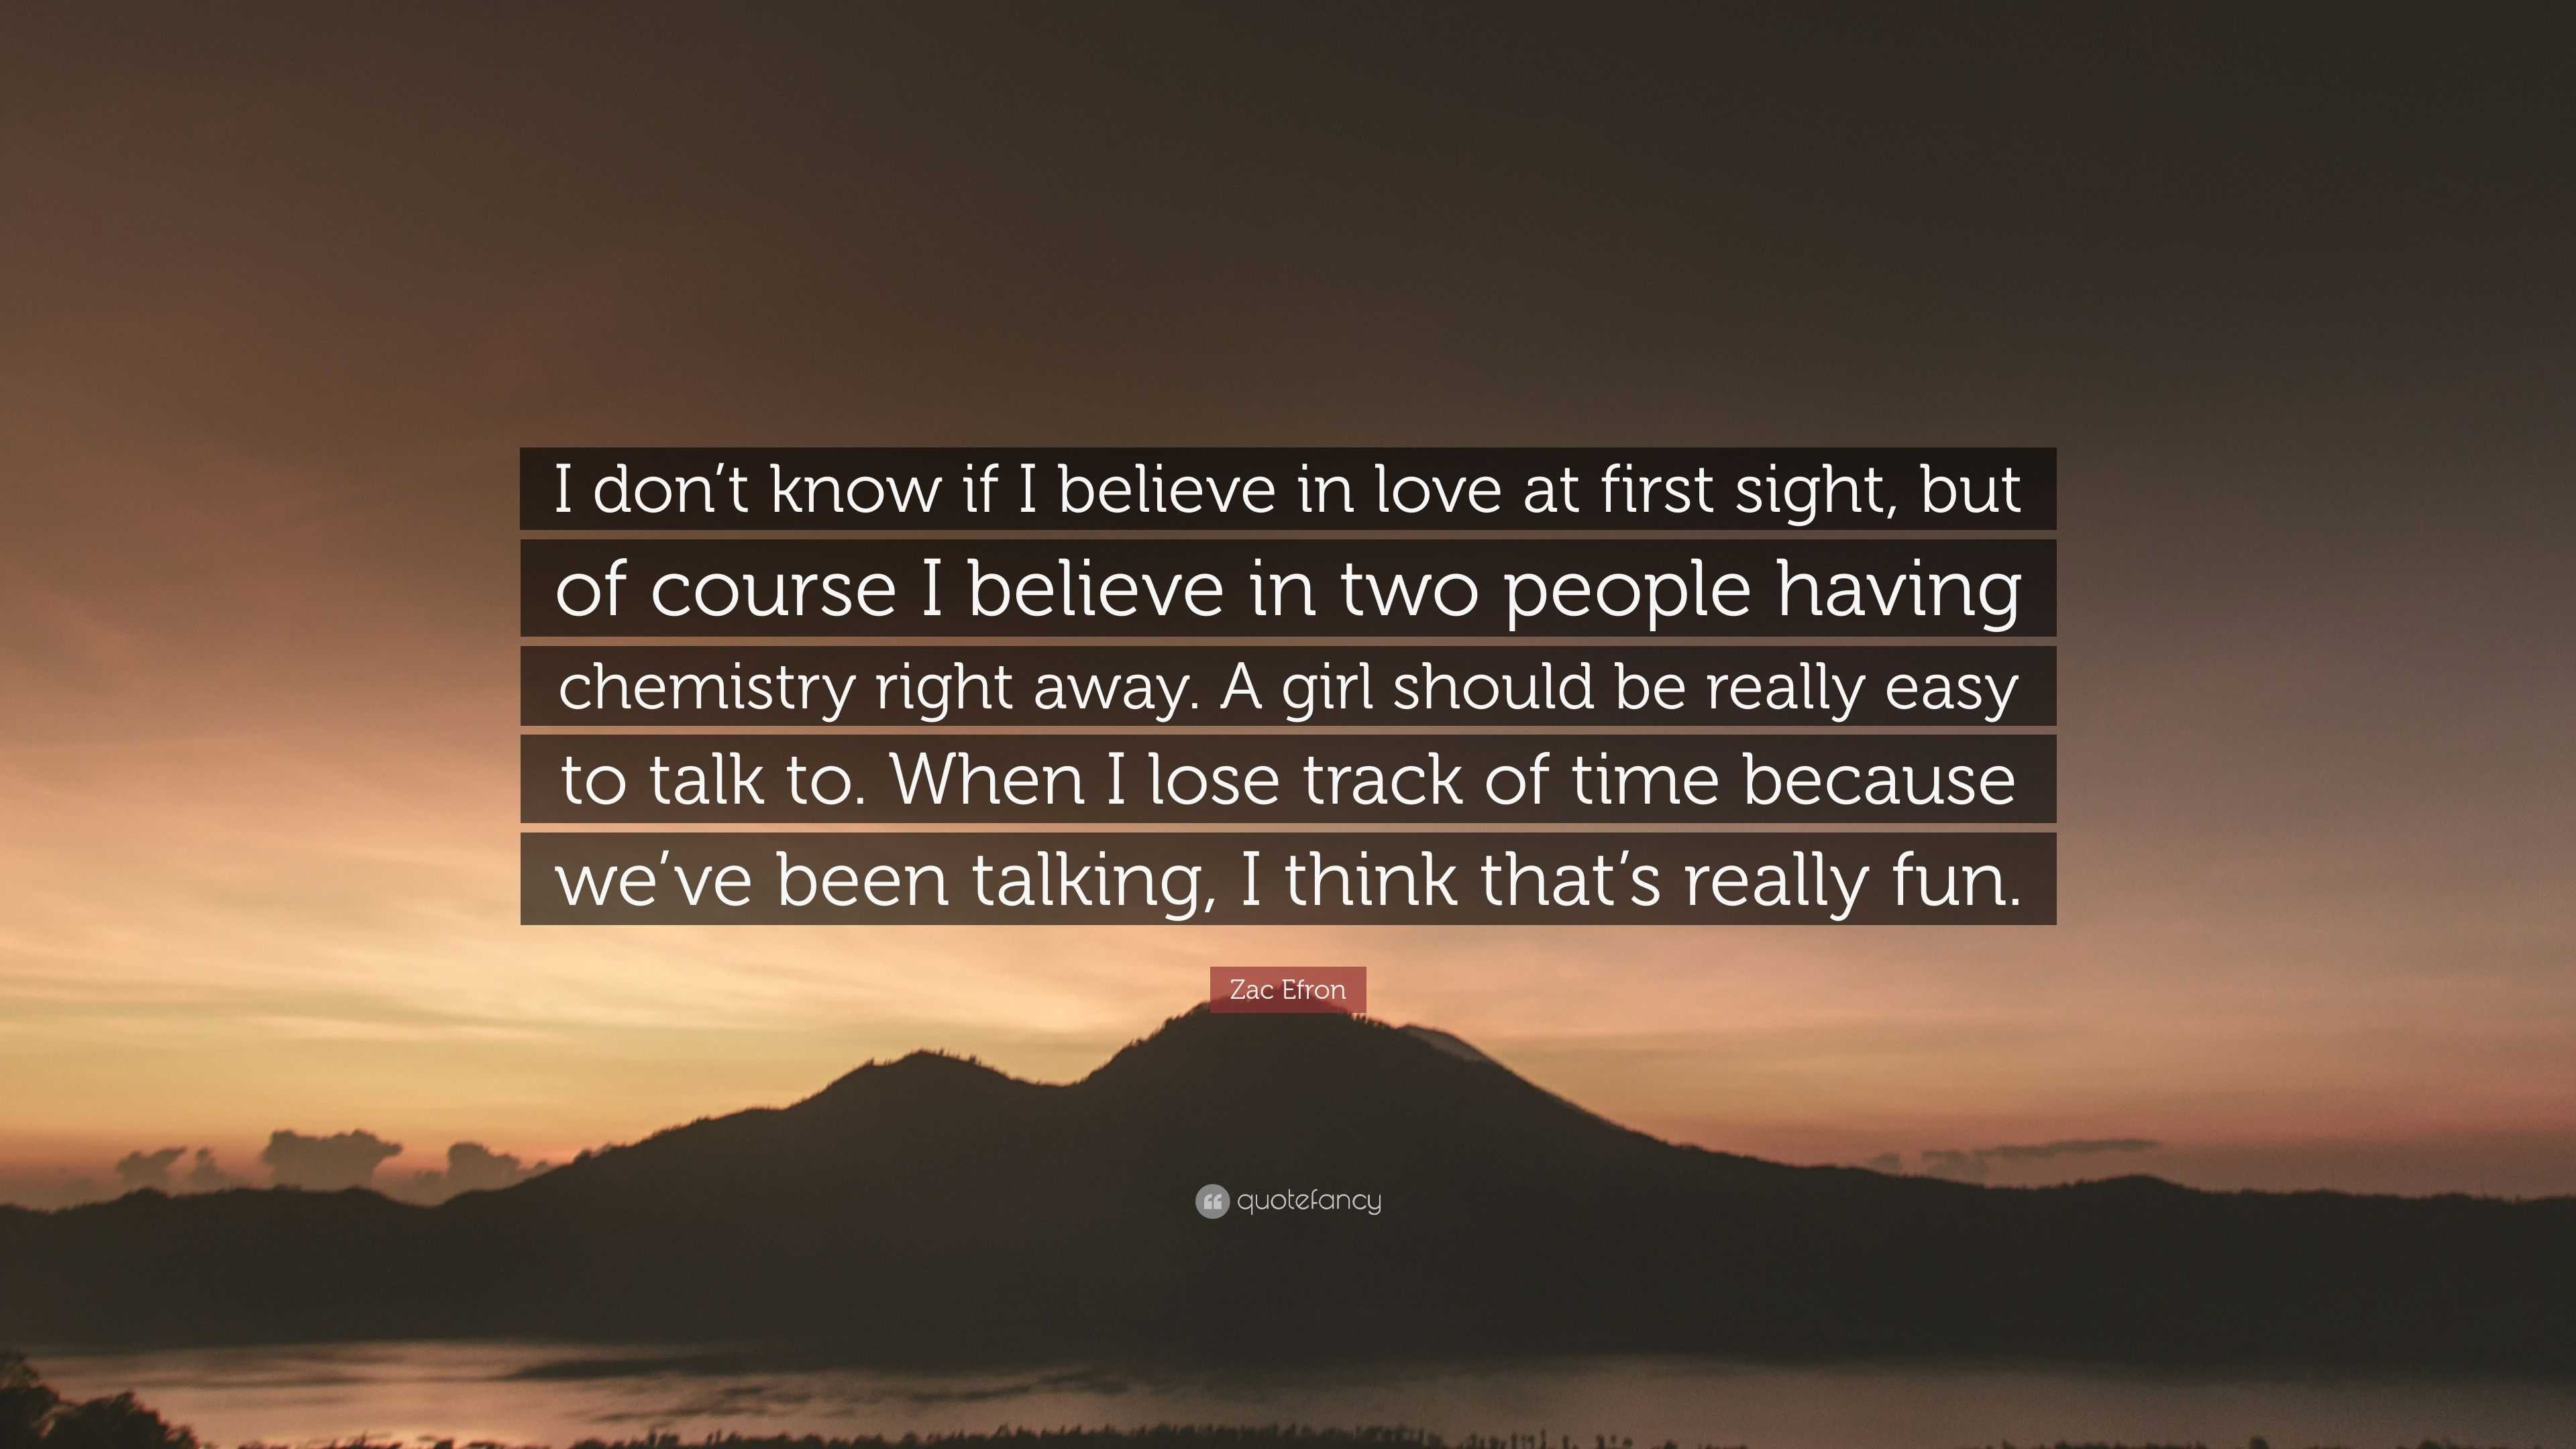 Zac Efron Quote “I don t know if I believe in love at